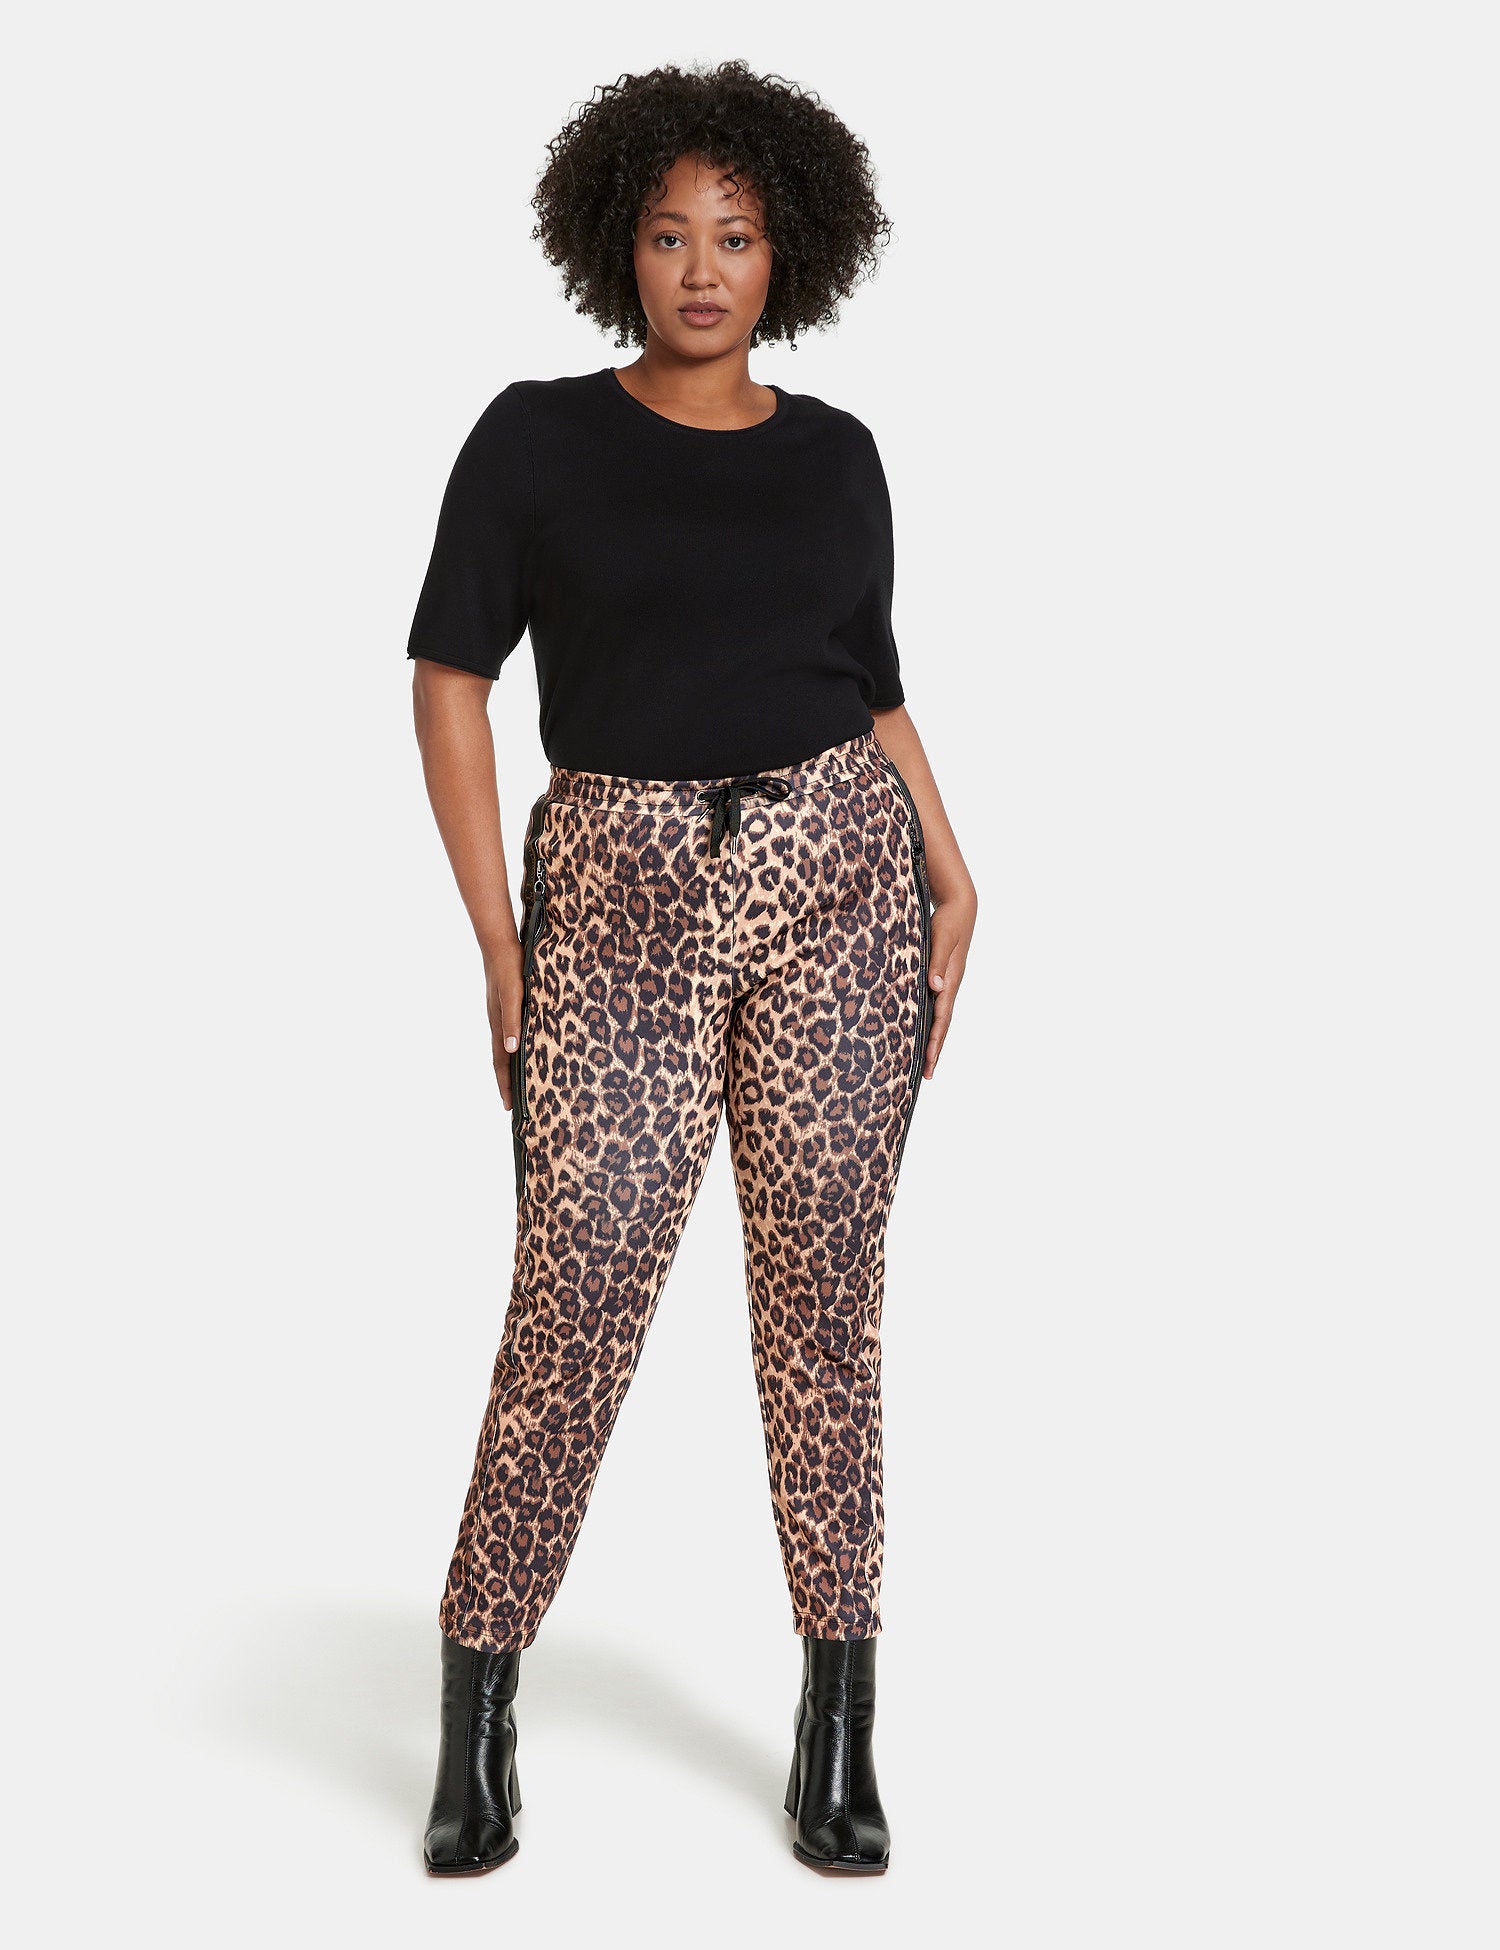 Tracksuit Bottoms With A Leopard Print Pattern_321203-26329_1102_07